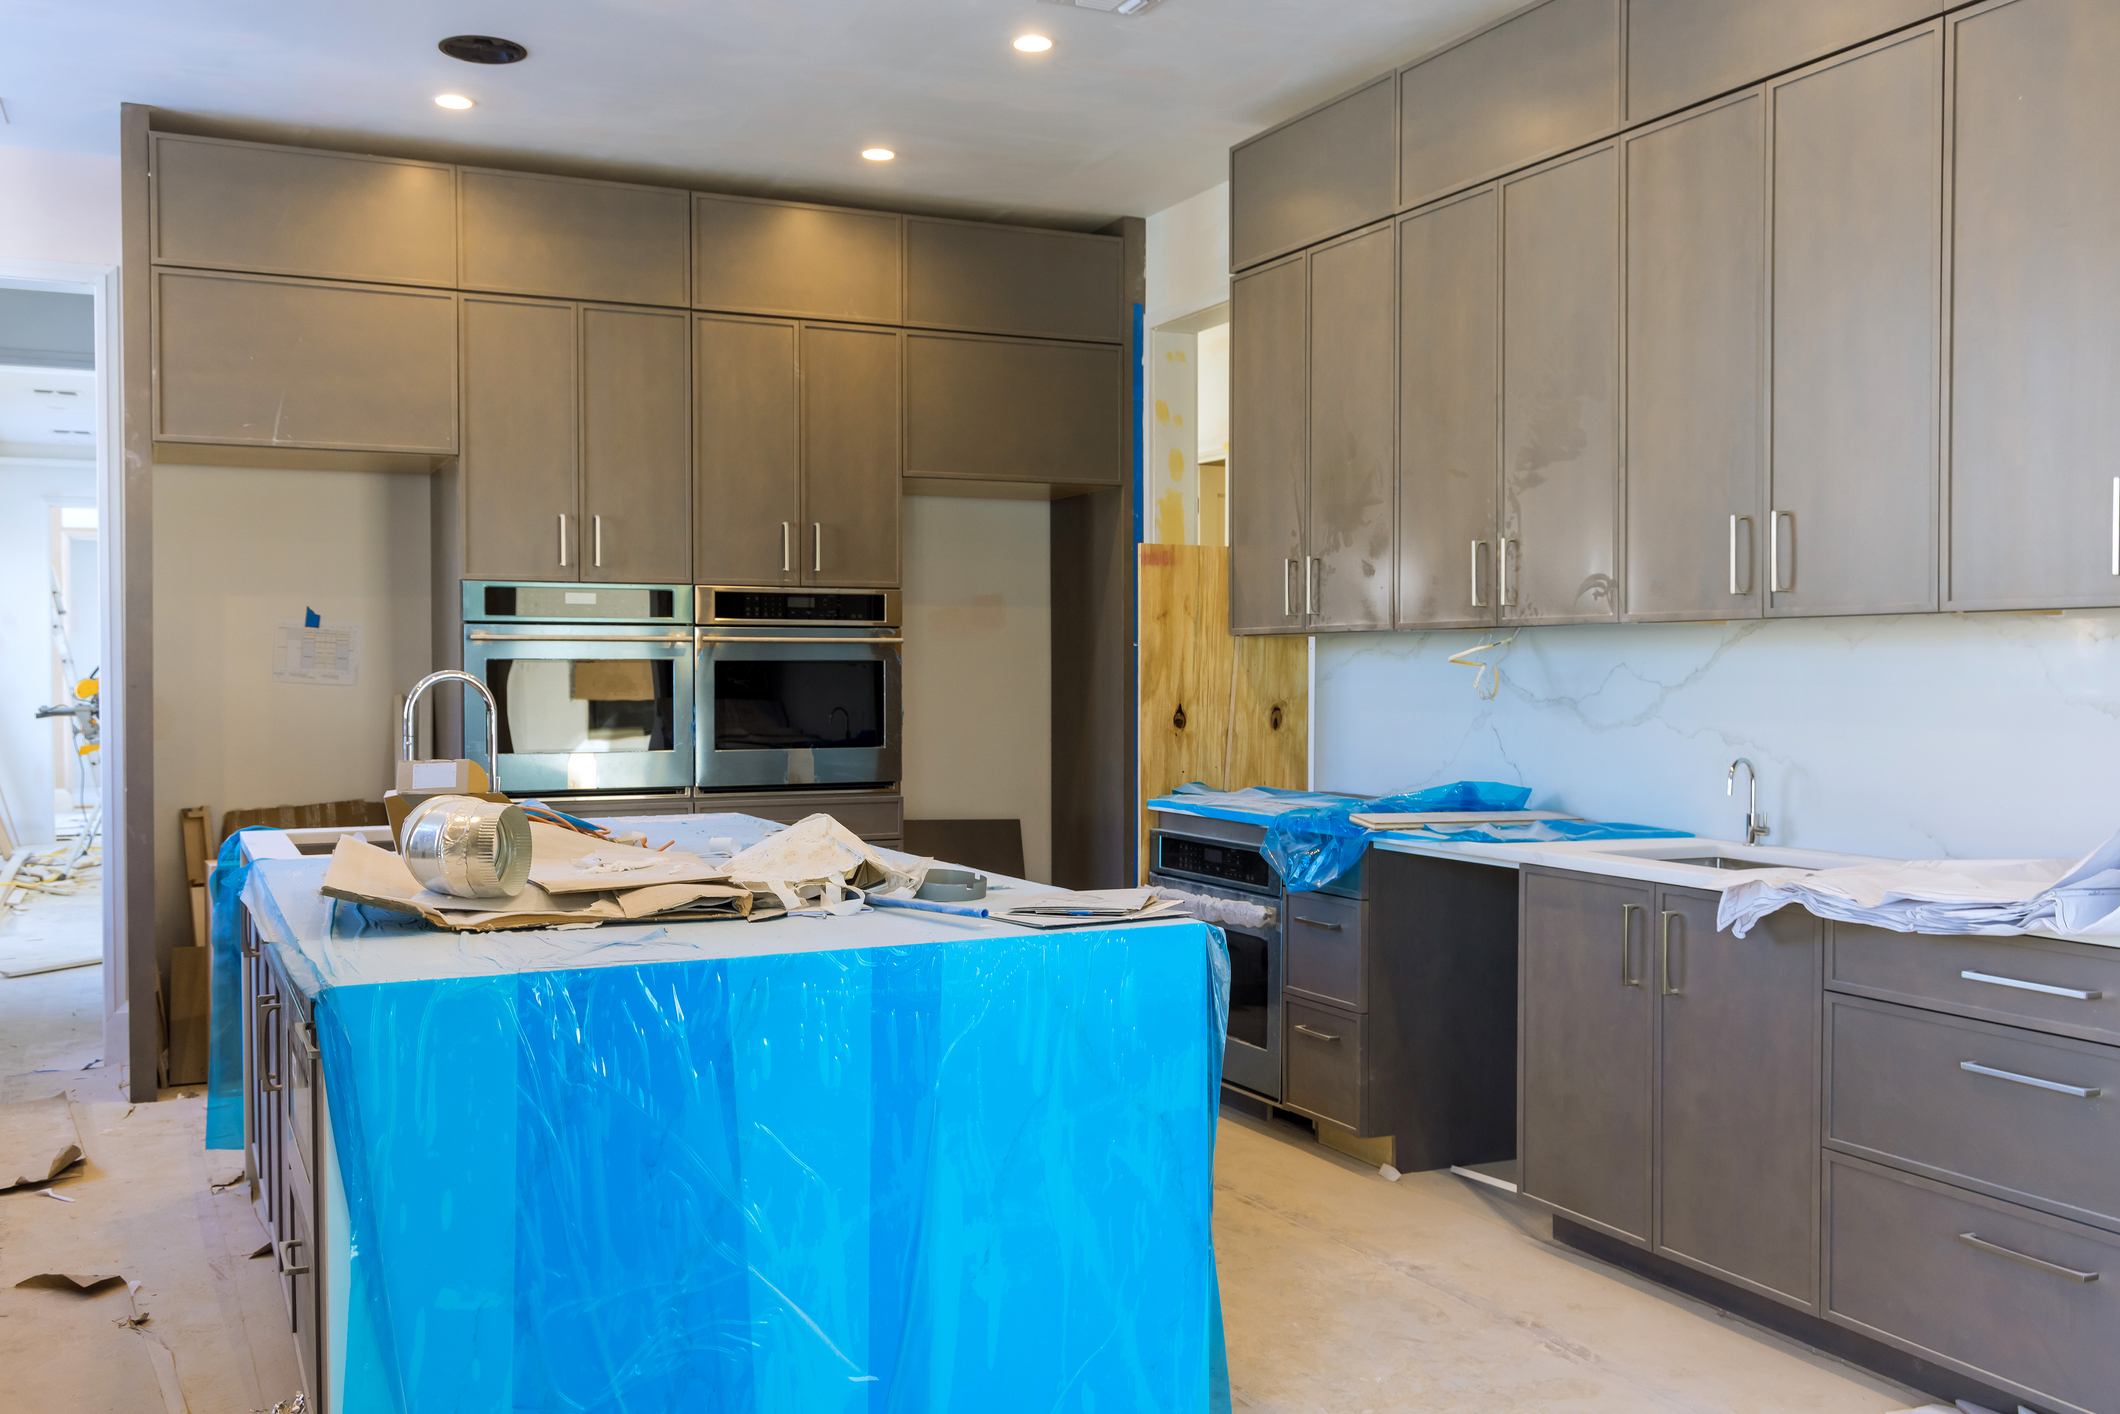 Kitchen Cabinet Refinishing & Painting Services in Philadelphia PA